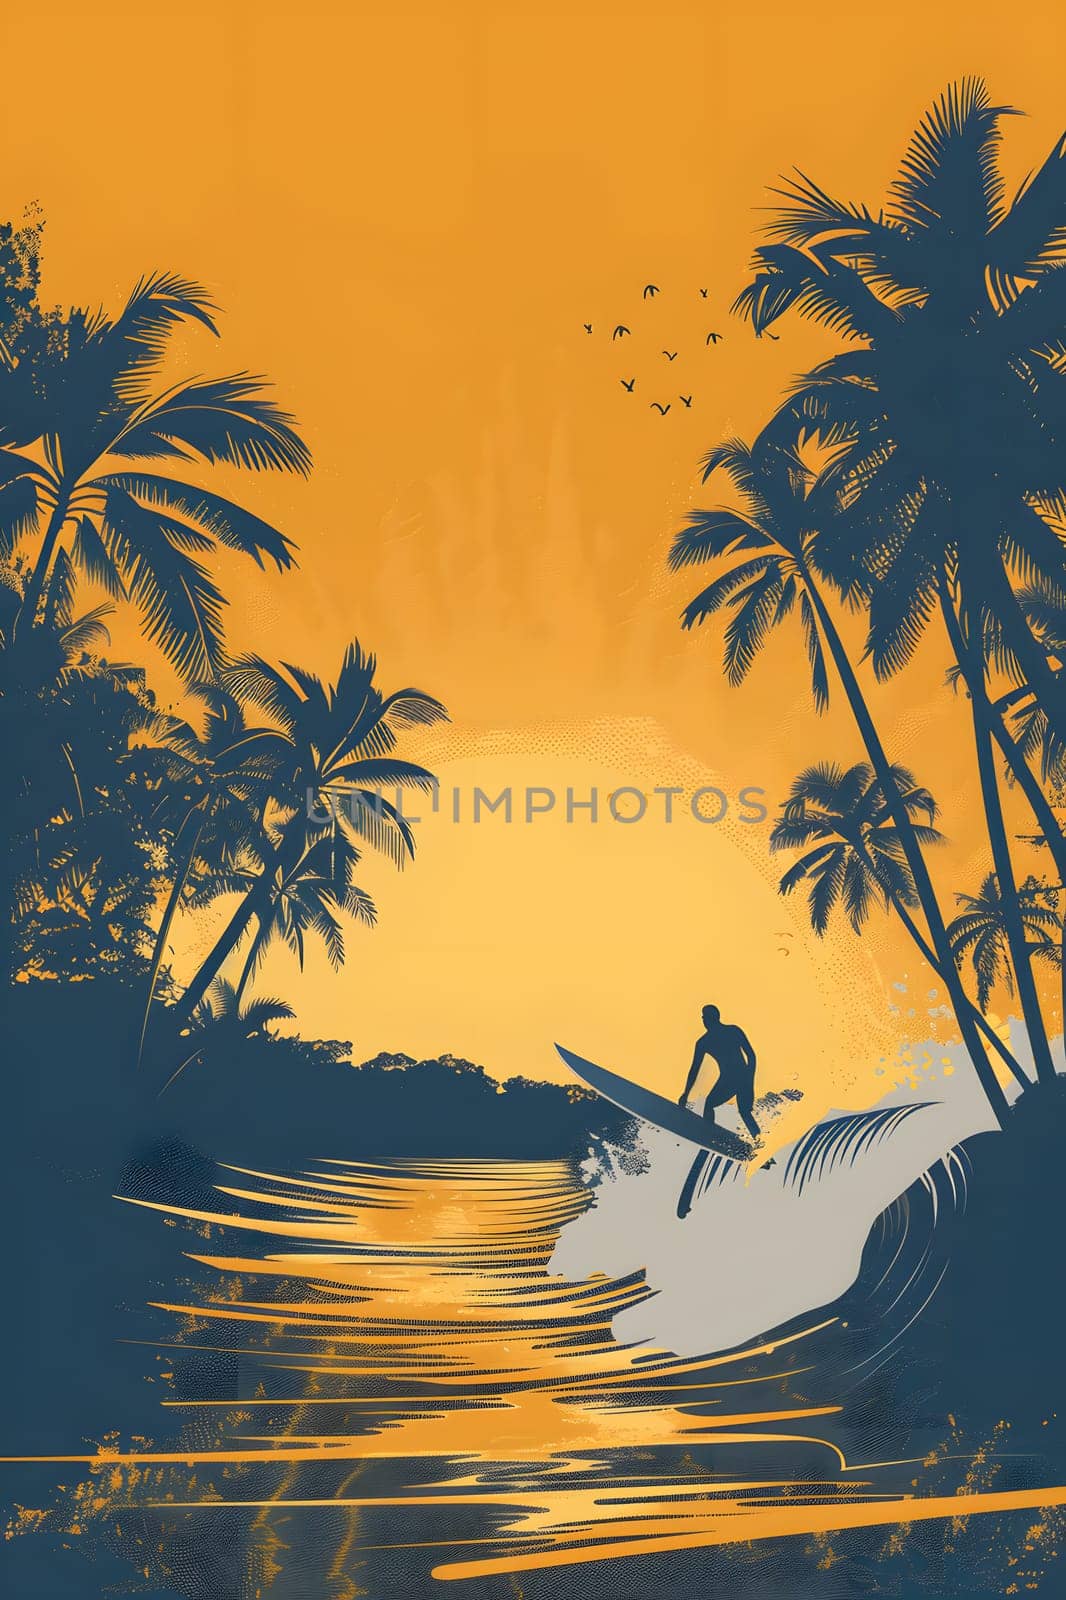 The man is surfing a wave on his board in the ocean under the sunset sky, surrounded by palm trees and lush vegetation during the afterglow